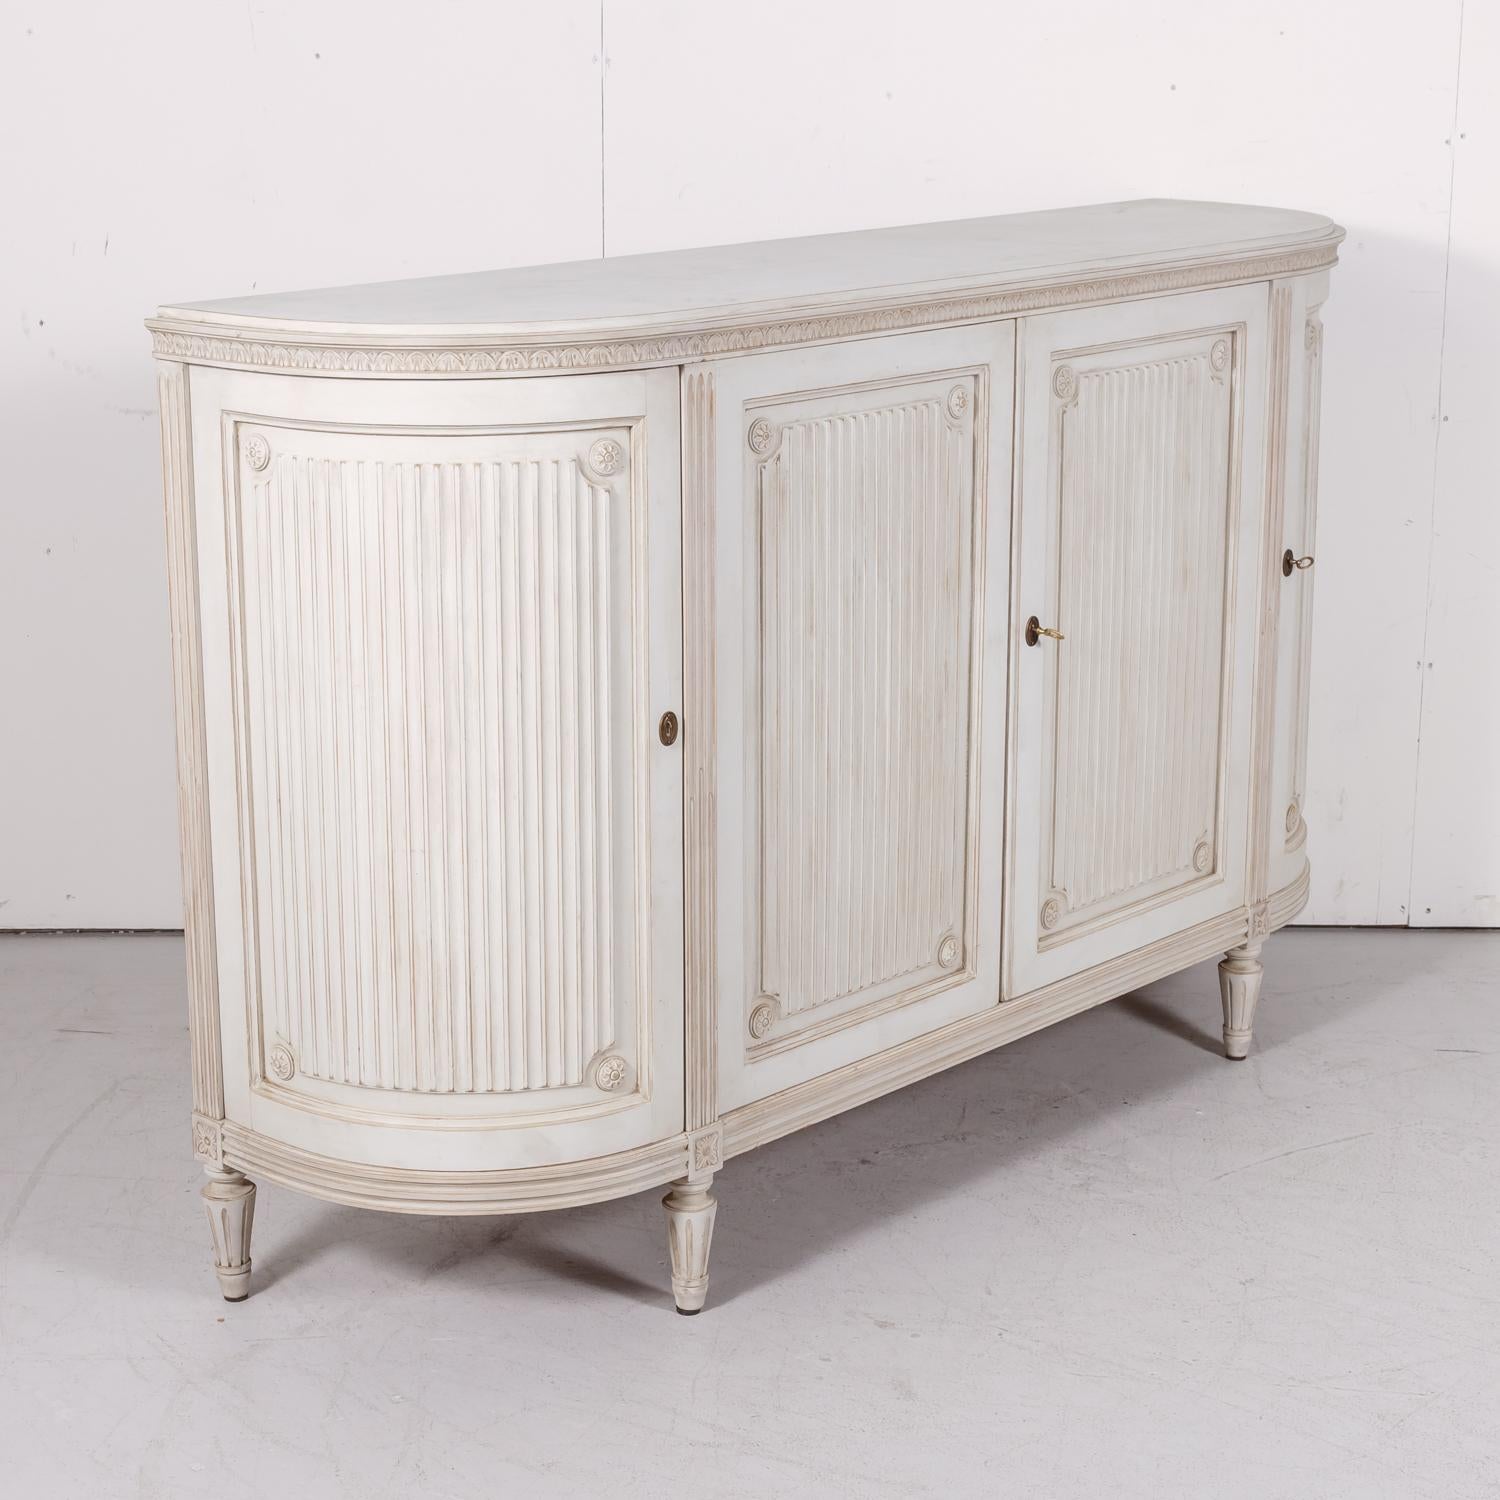 A mid-20th century Swedish Gustavian style painted enfilade buffet with lovely curved sides, circa 1950s. Having four hand reeded panel doors with carved rosettes in the corners, the center doors of this lovely vintage enfilade open to reveal a